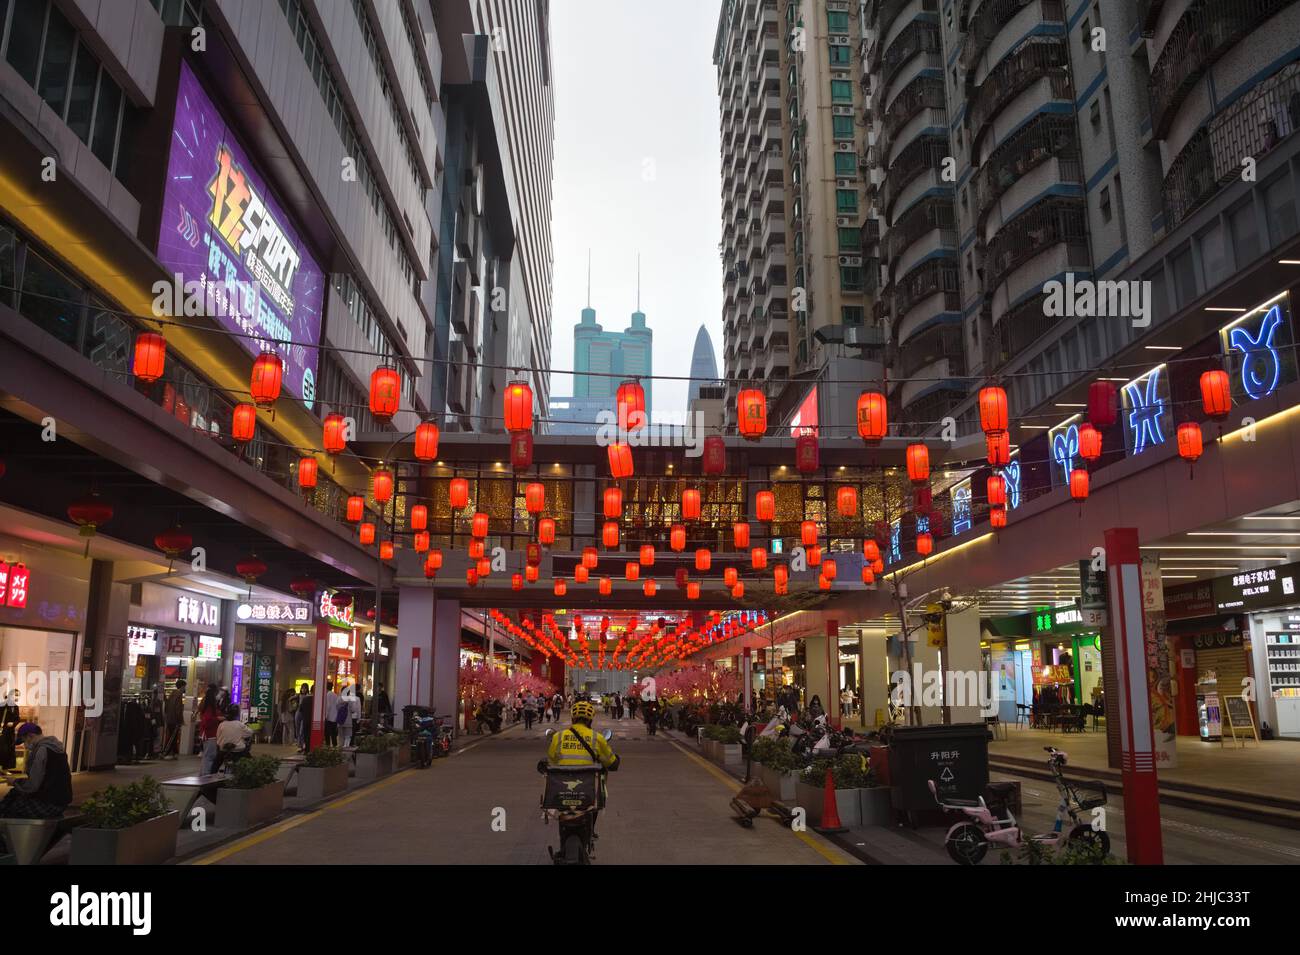 Red lanterns displayed ahead of Lunar New Year in Shenzhen, China Stock Photo